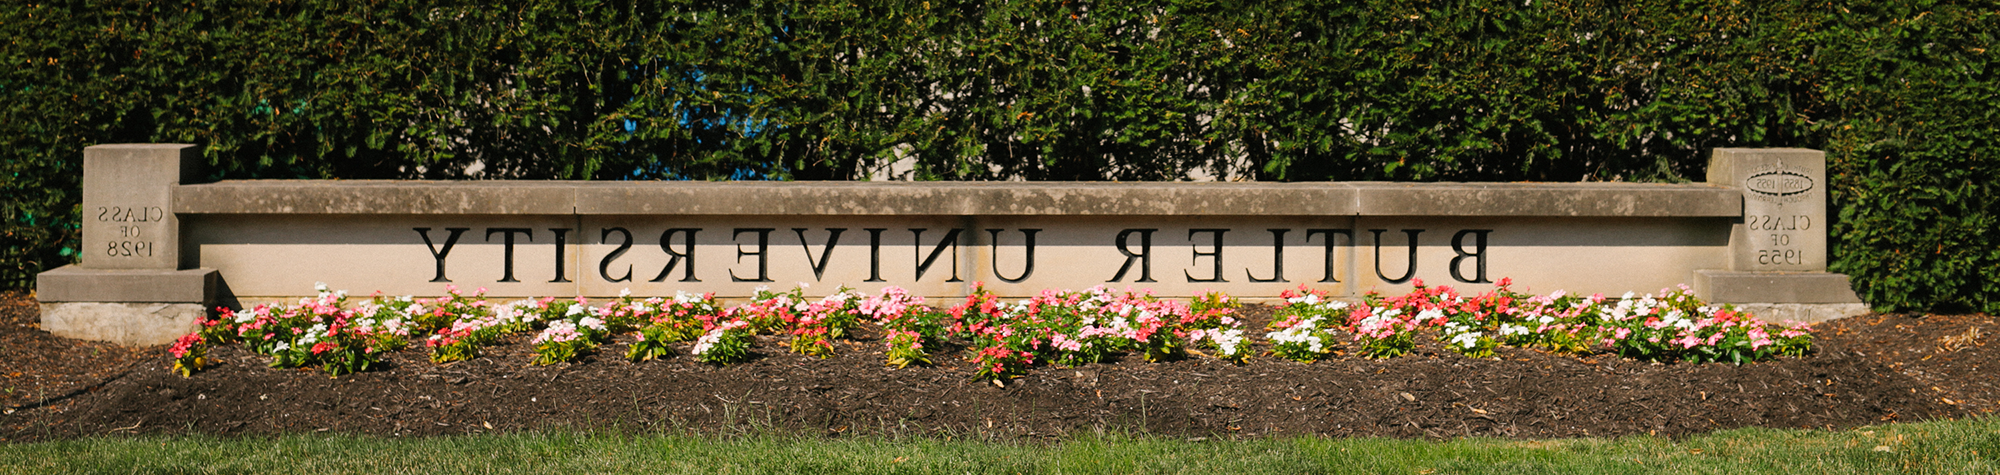 low stone wall with Butler University engraved and flowers in front